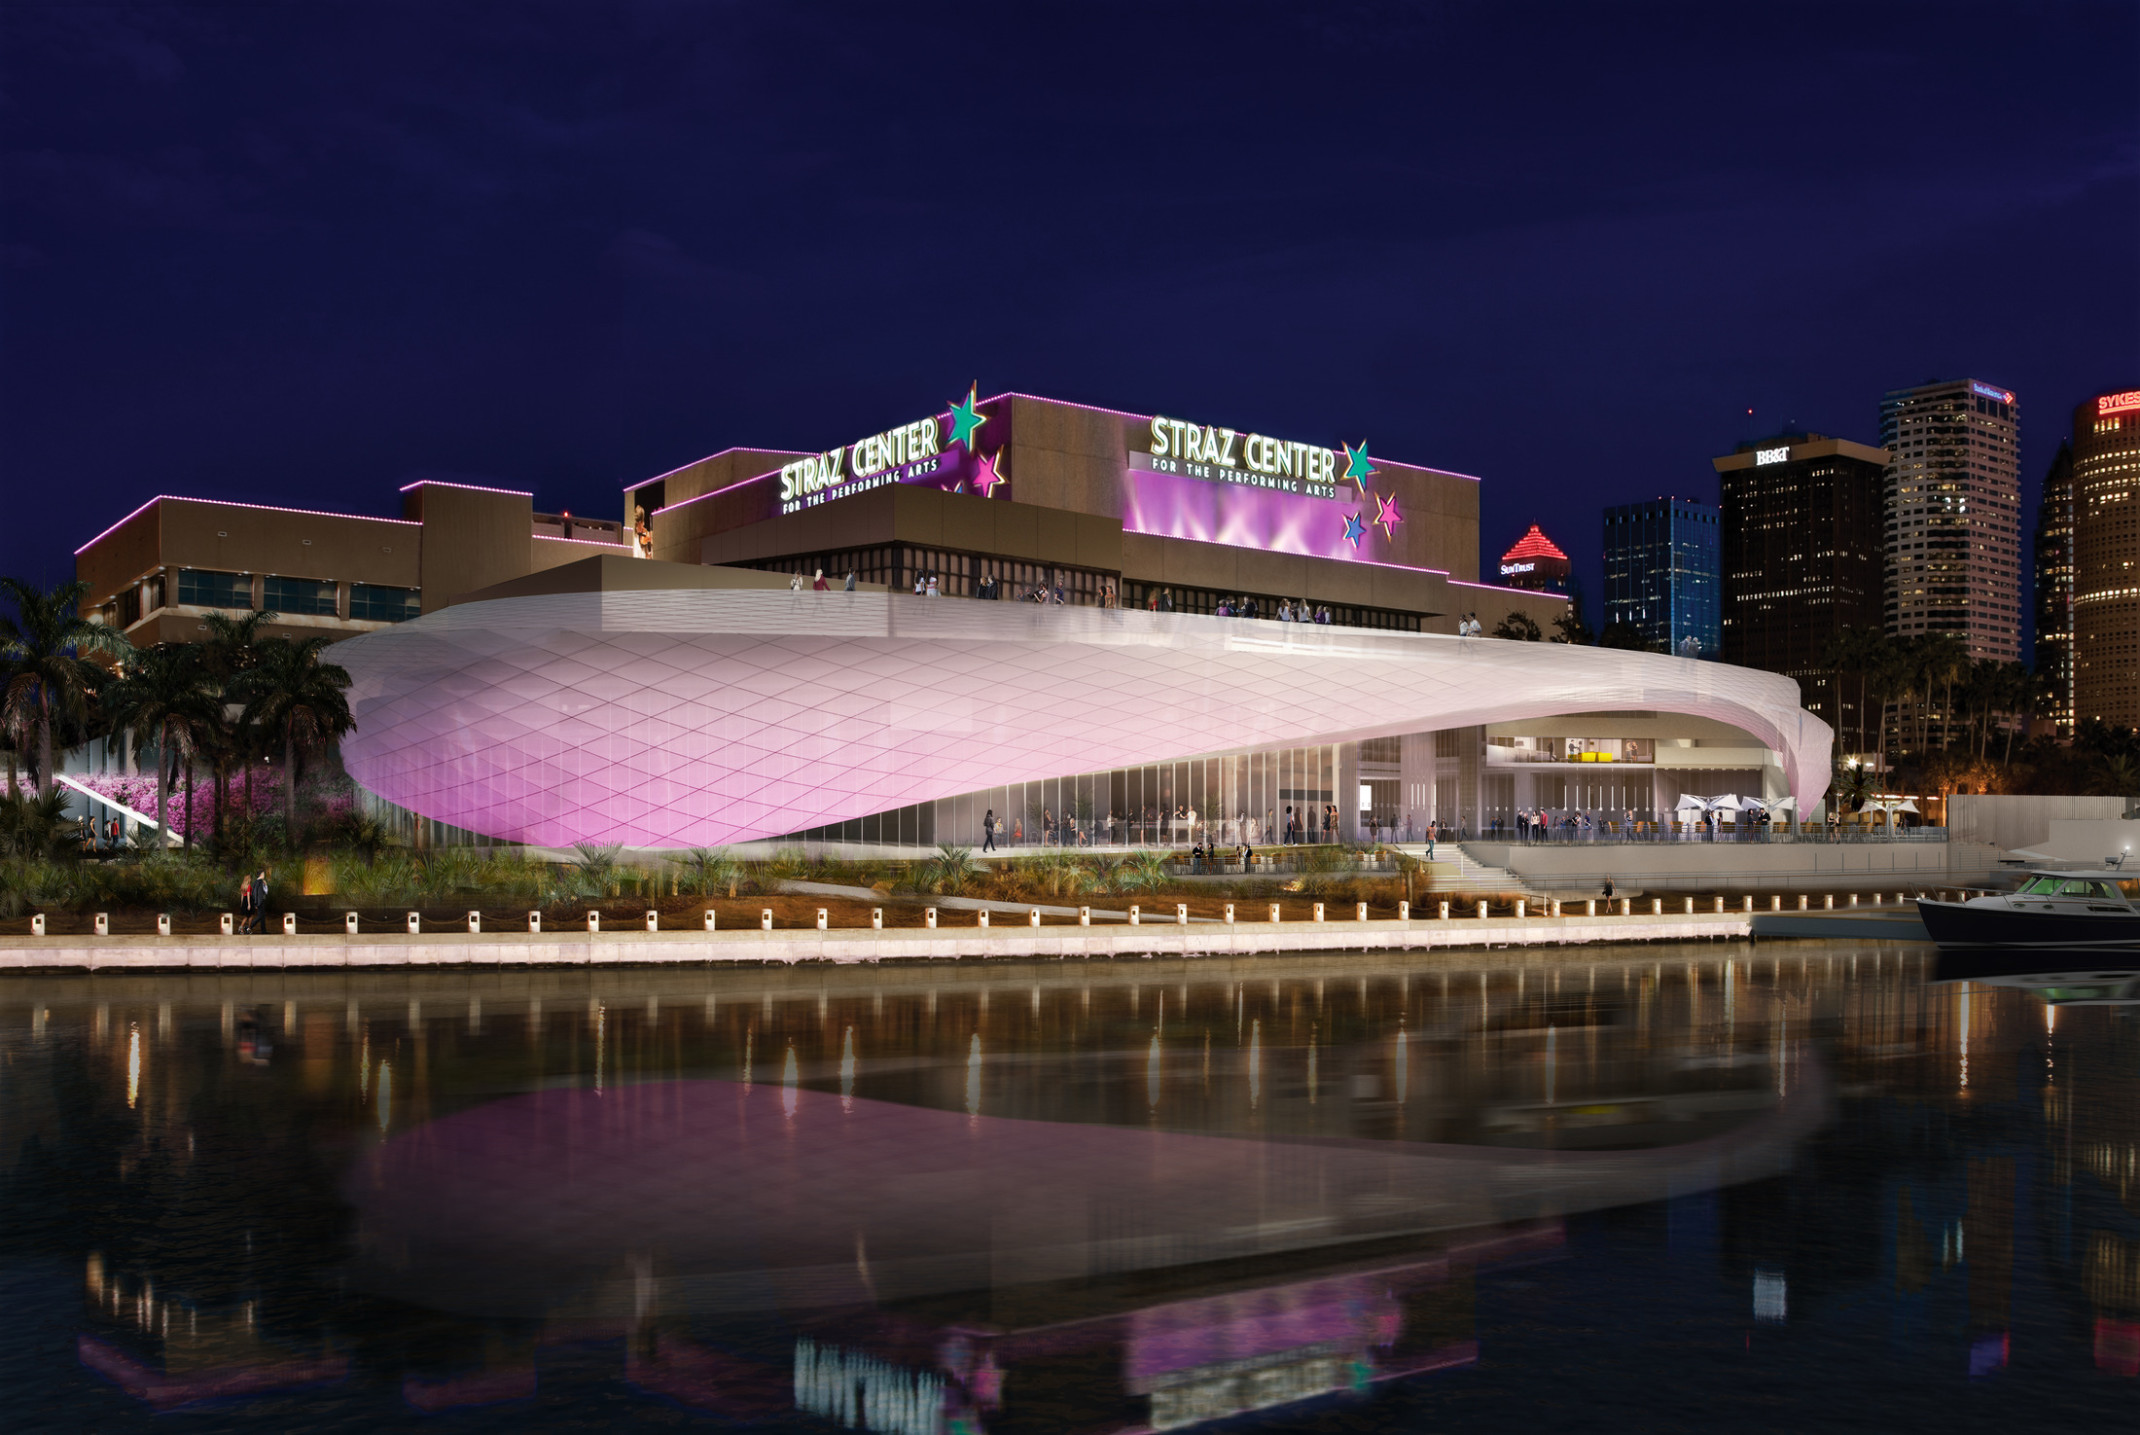 The Straz Center for the Performing Arts viewed from the river at night illuminated in purple